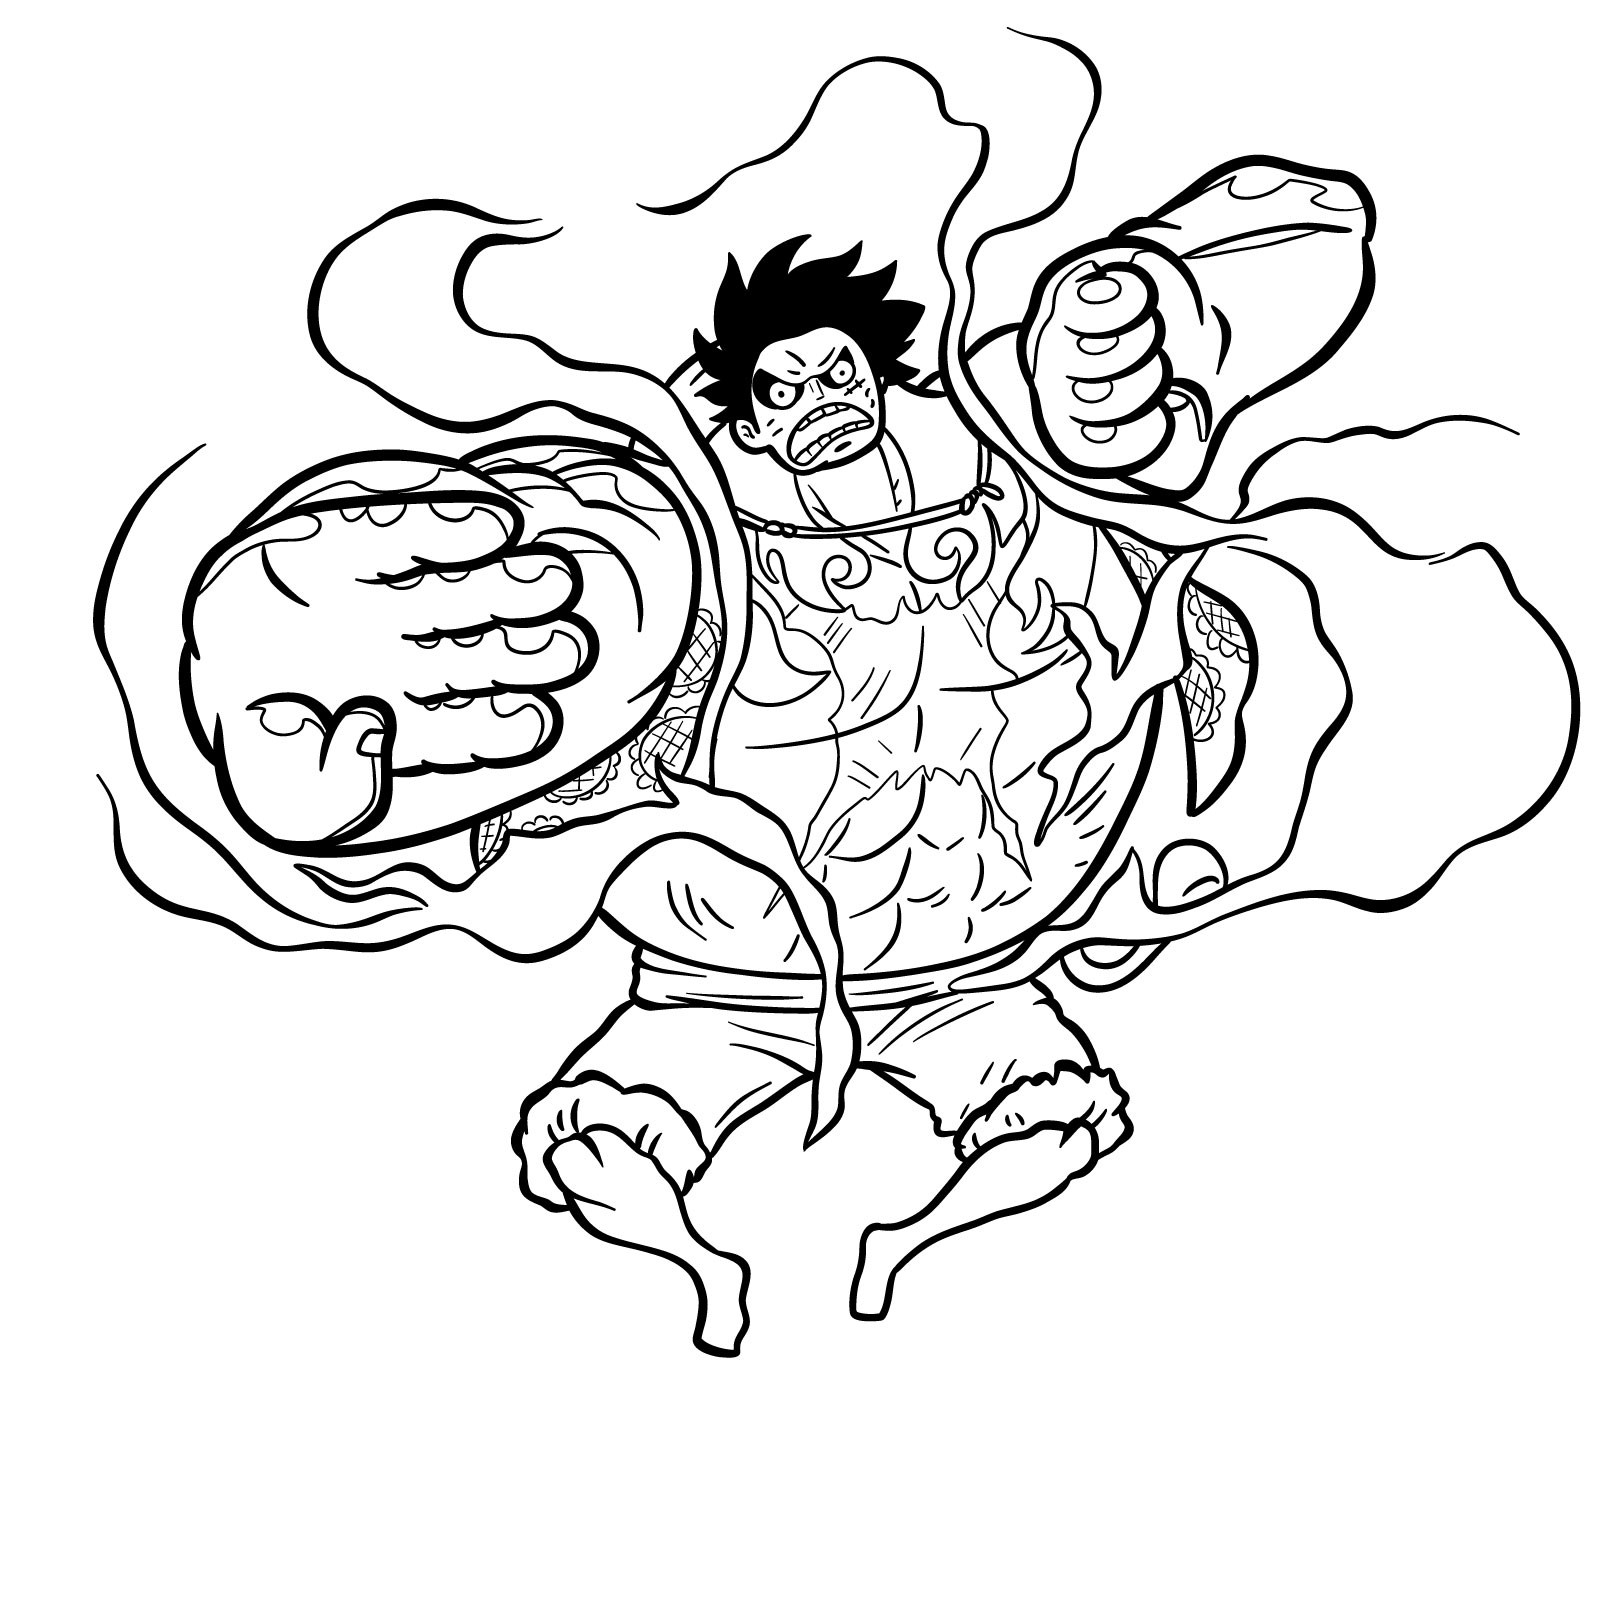 How to Draw Luffy in Gear 4 Bounceman - final step